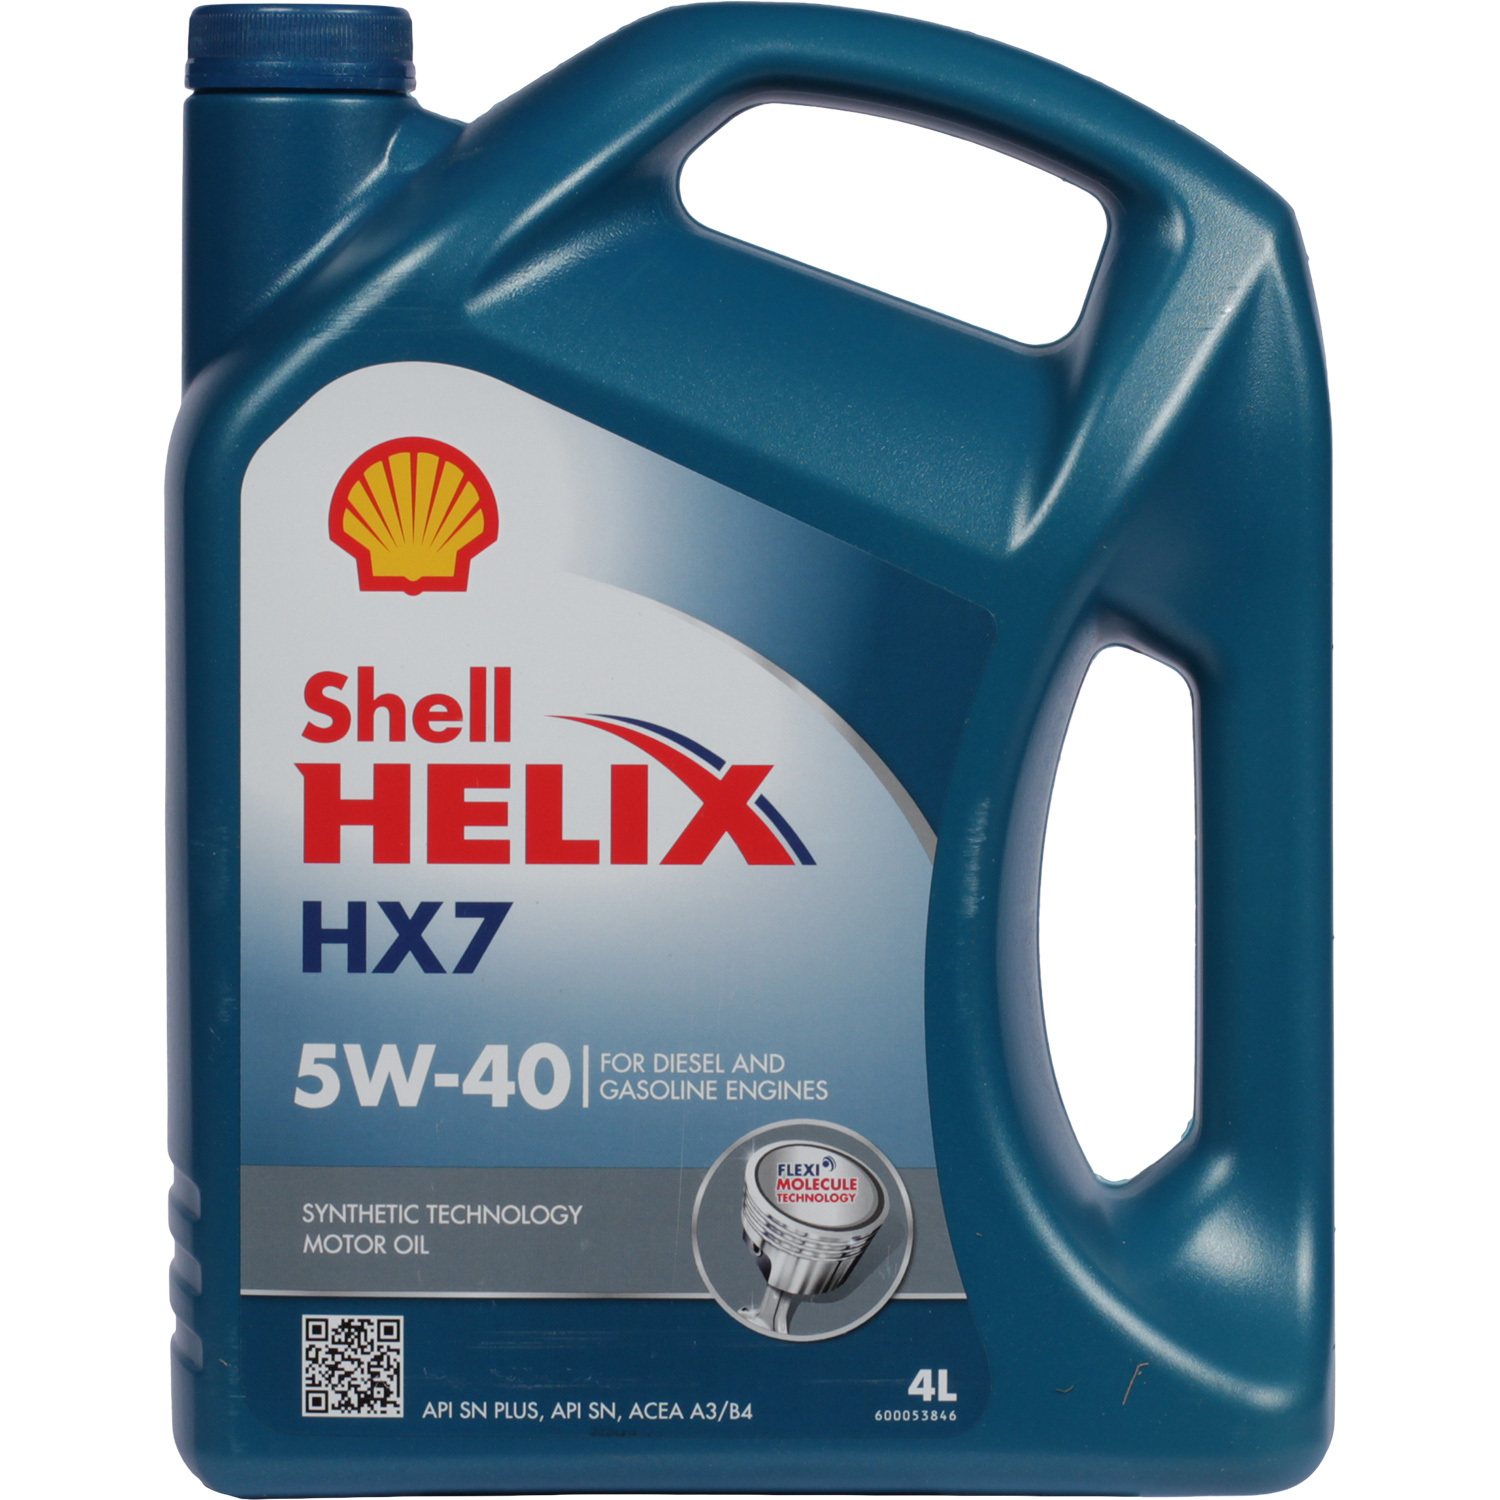 Shell Моторное масло Shell Helix HX7 5W-40, 4 л